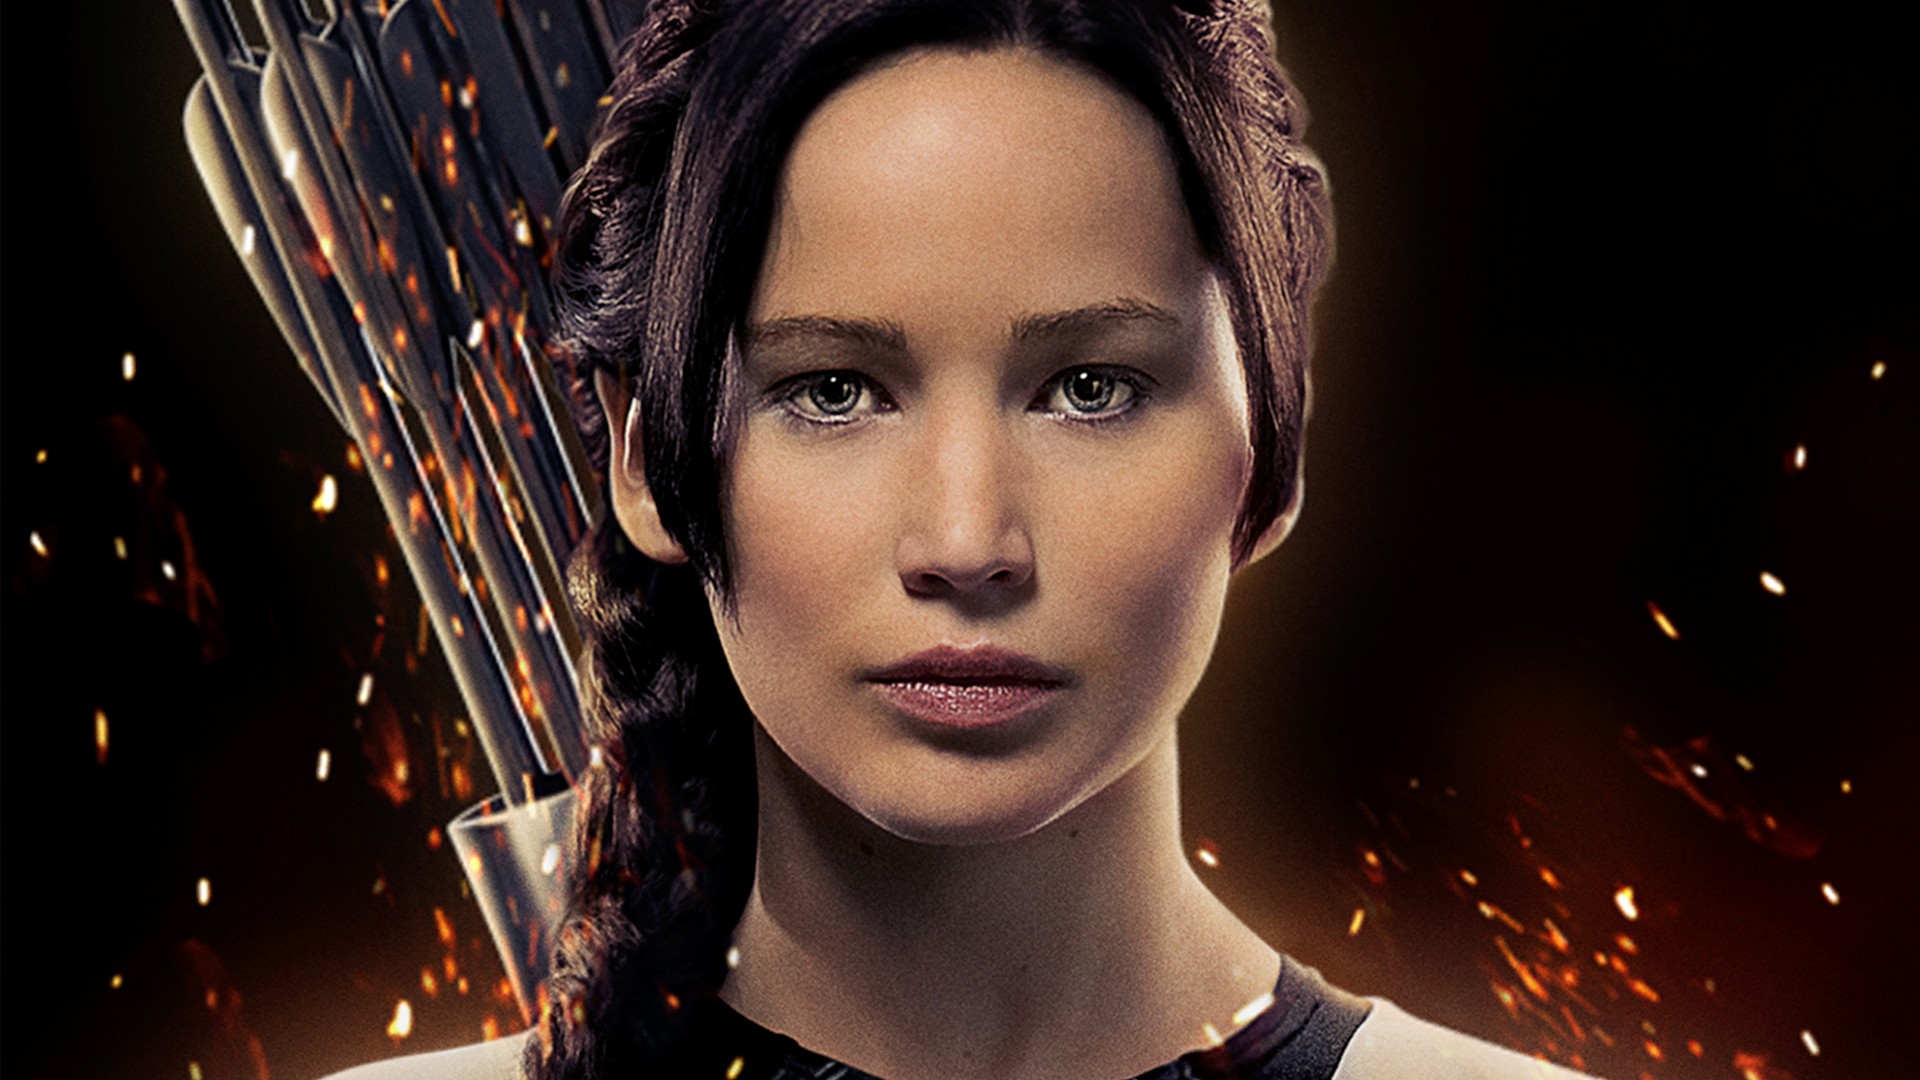 The Hunger Games: Catching Fire #2